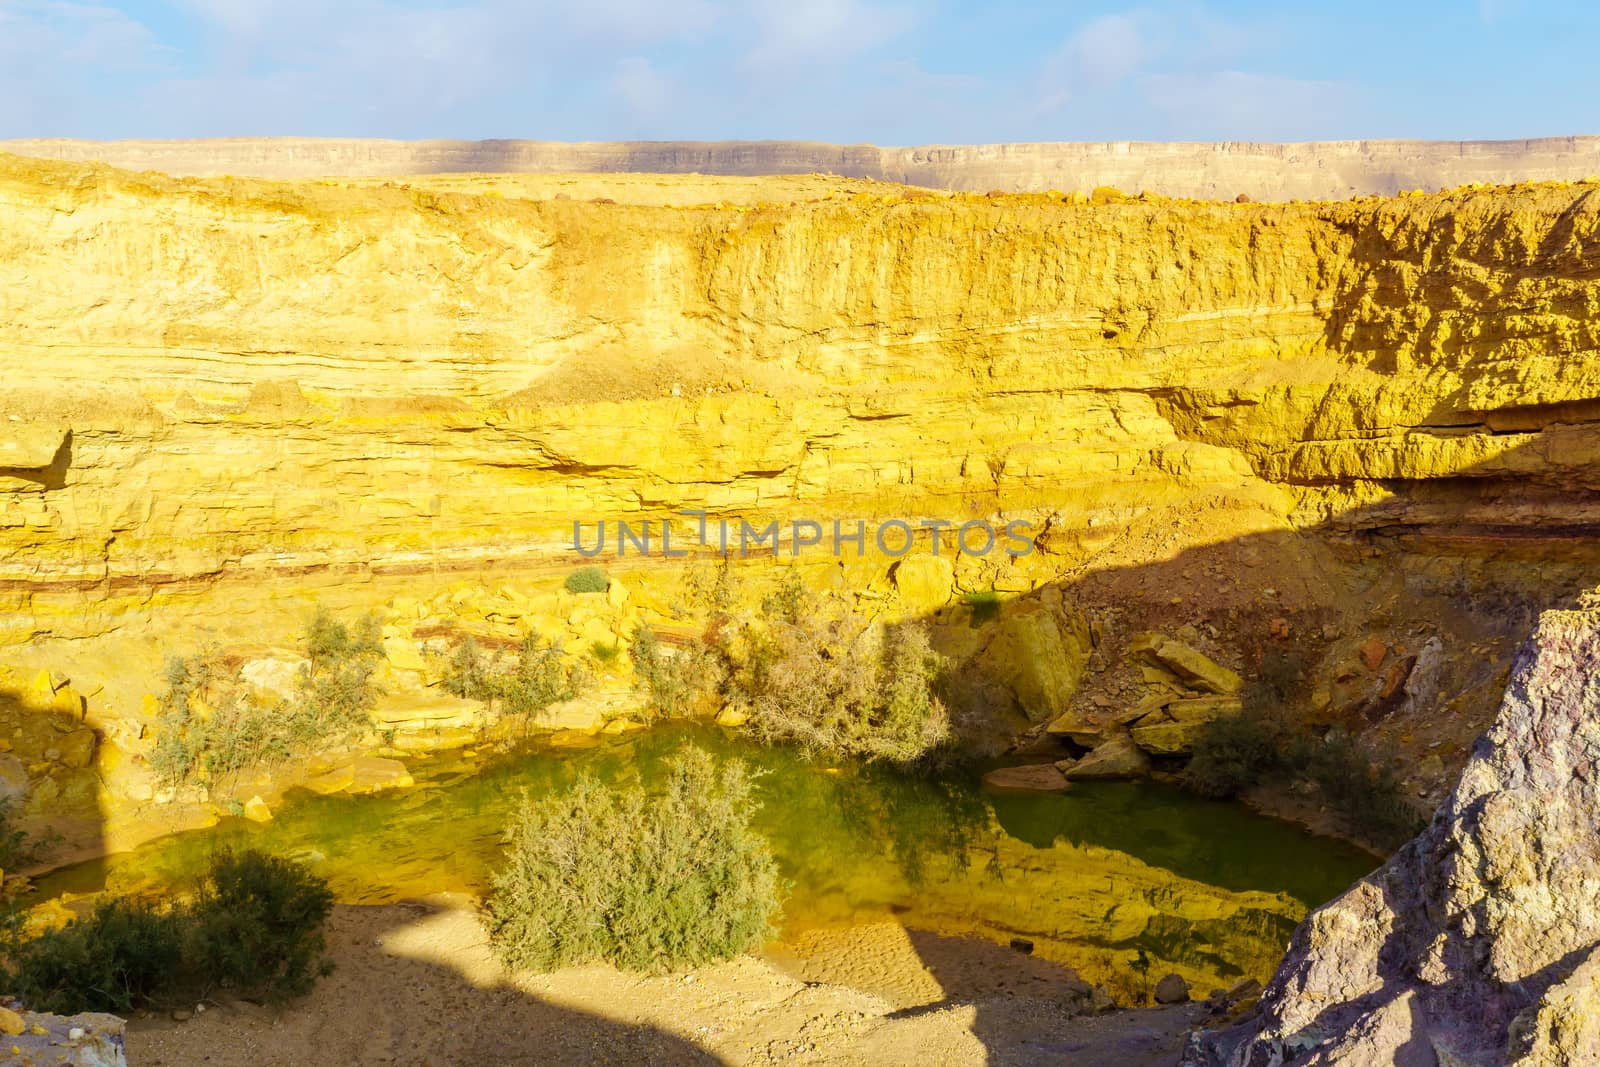 Ramon Colors Route, in Makhtesh Ramon (Ramon Crater) by RnDmS